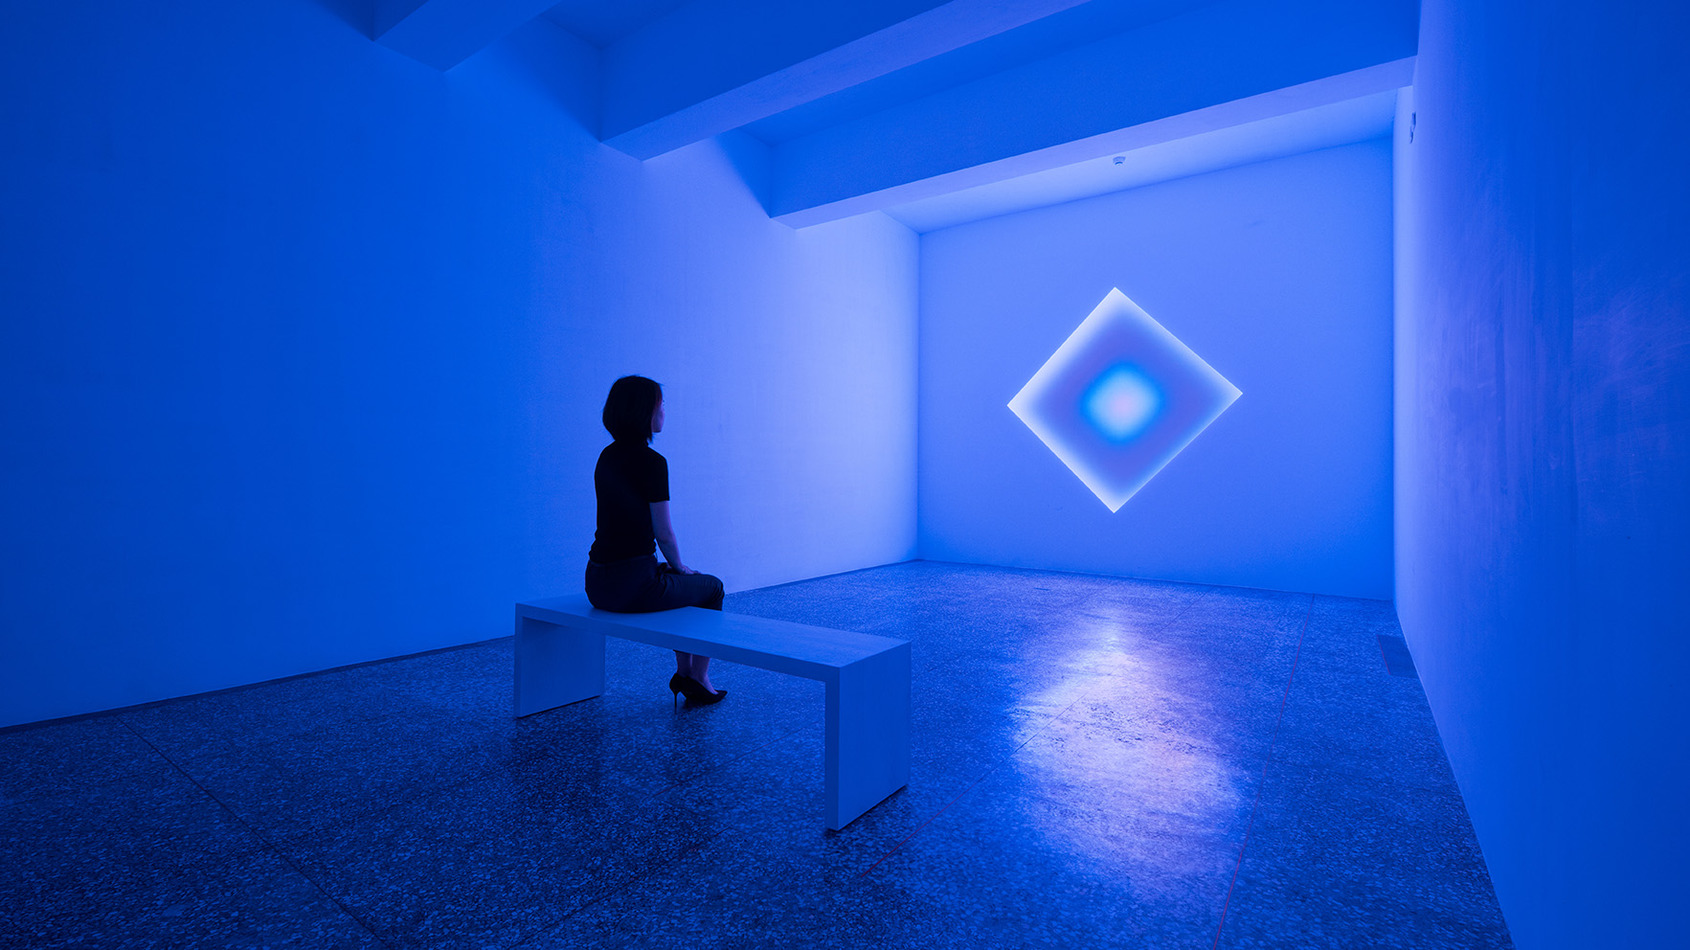 James Turrell, Corinth Canal, The Diamond, 2016, L.E.D. light, etched glass and shallow space, 2 hours 30 minutes, 89 x 89 inches © Courtesy of the artist and ALIEN Art Centre 